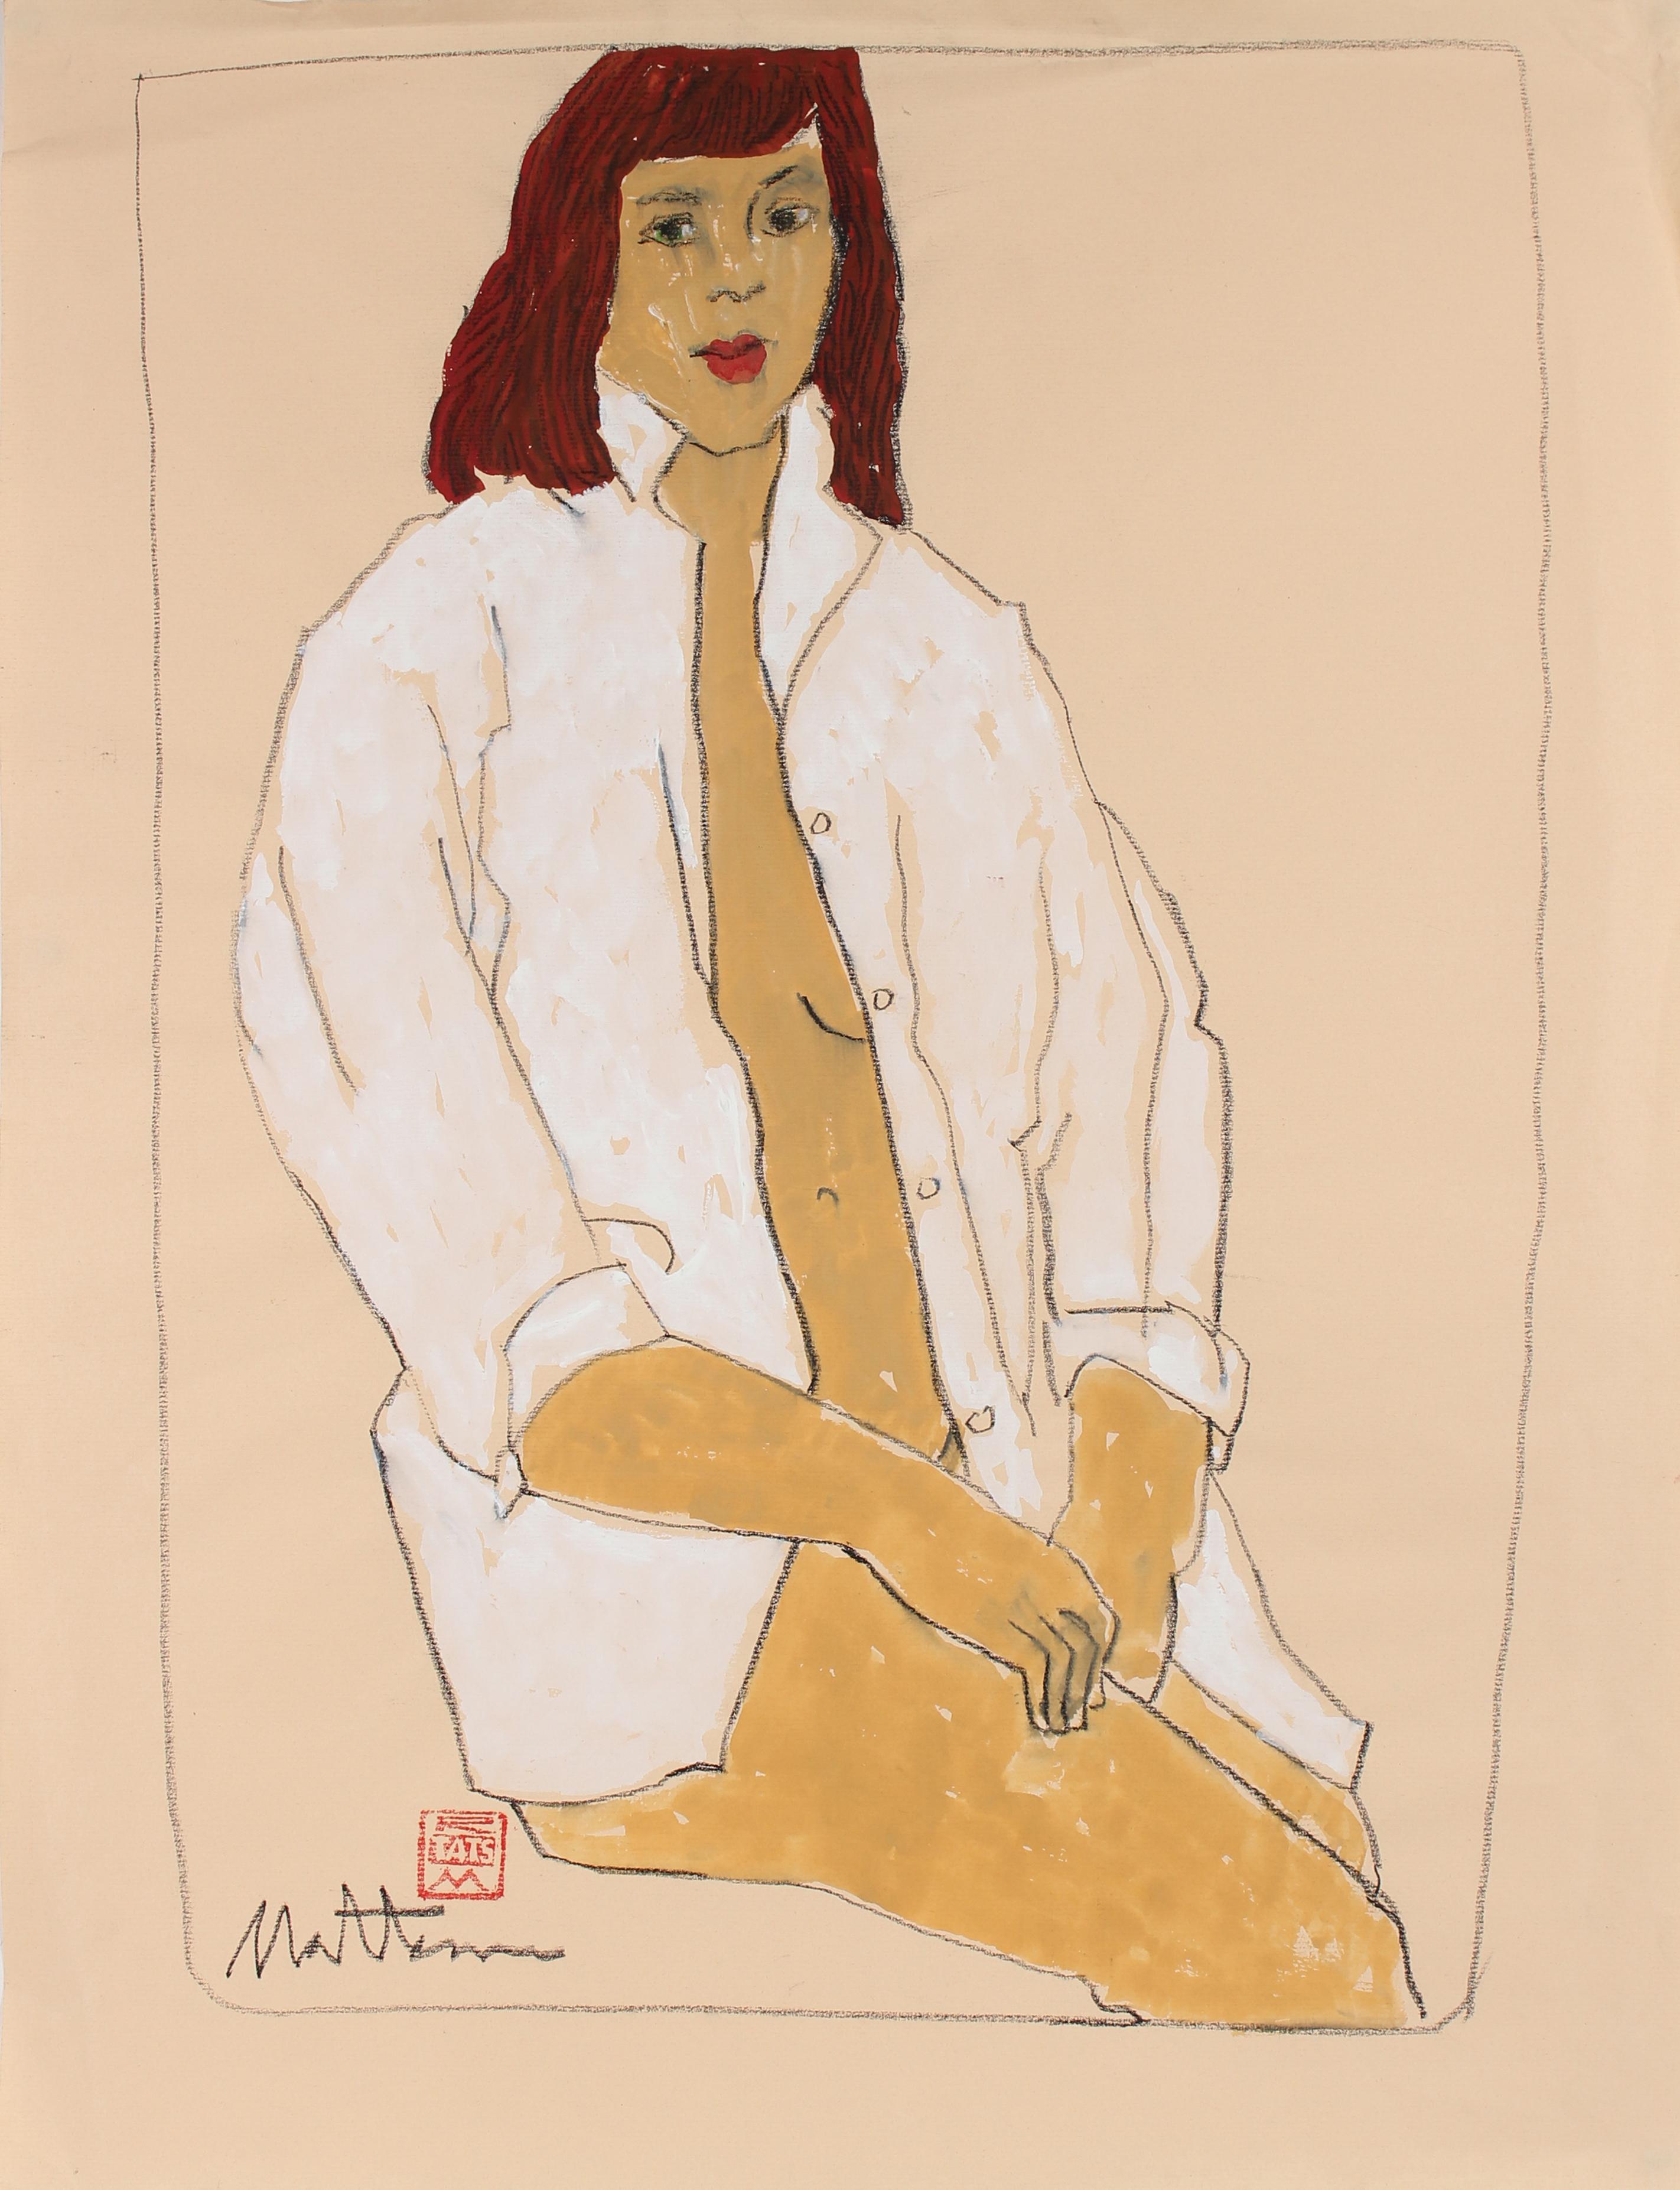 Rip Matteson Nude - Female Figure in a White Shirt, Charcoal & Gouache Painting, Late 20th Century